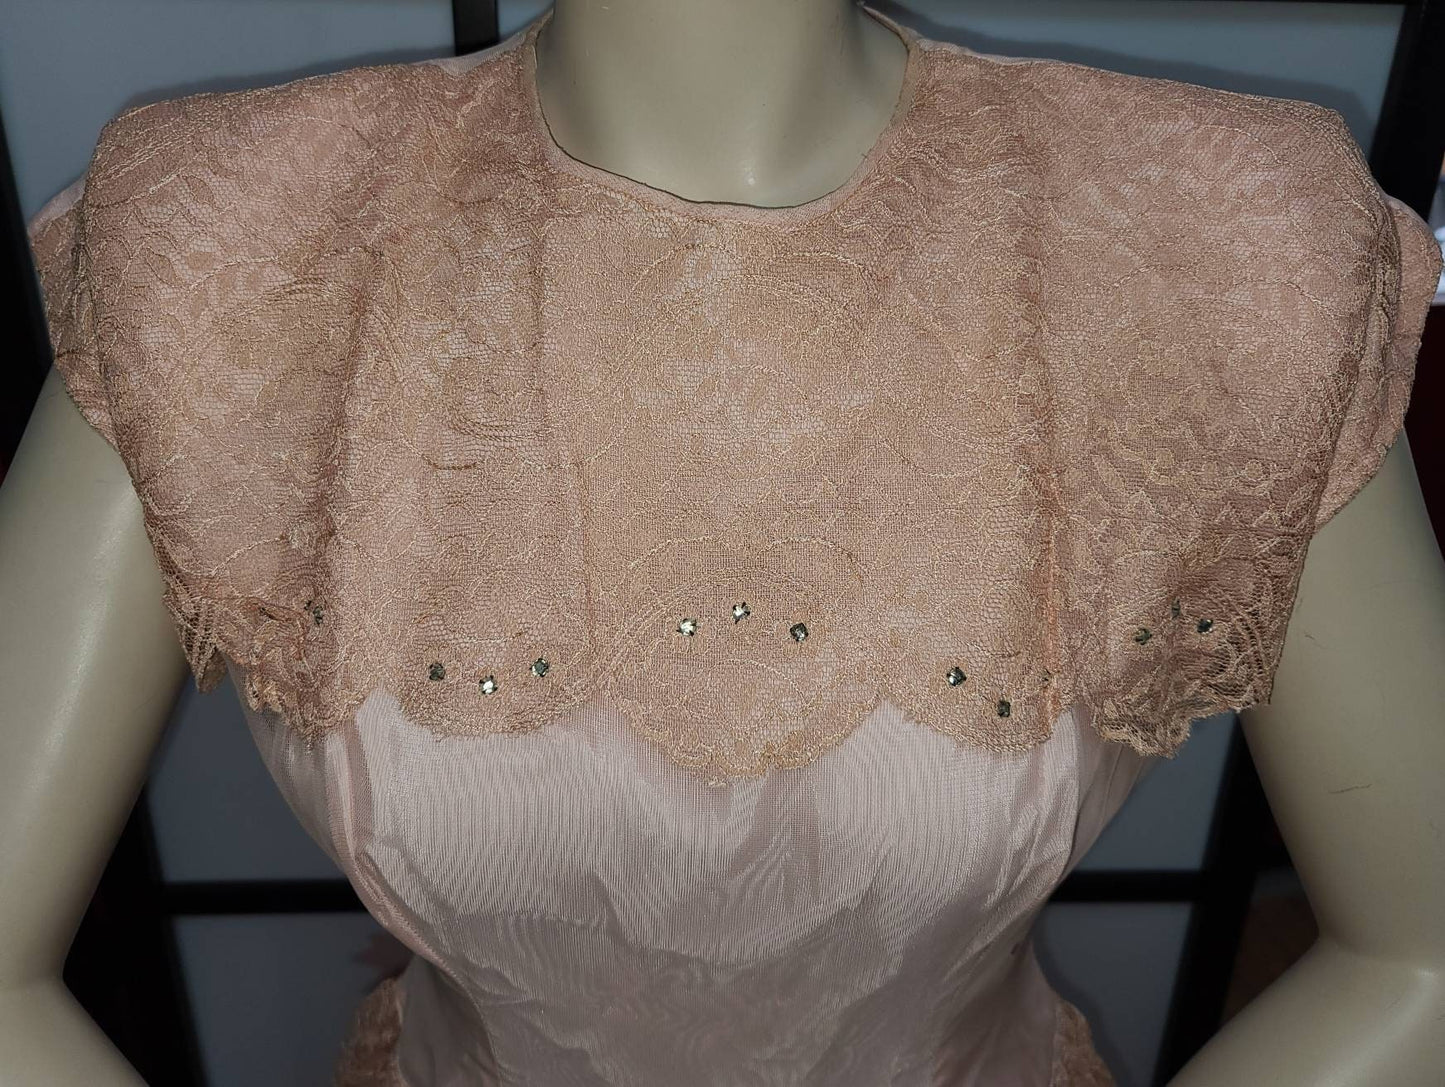 SALE Vintage Formal Dress 1950s Long Pink Lace Rhinestone Peplum Gown Prom Dress Rockabilly S M chest 38 in. some flaws